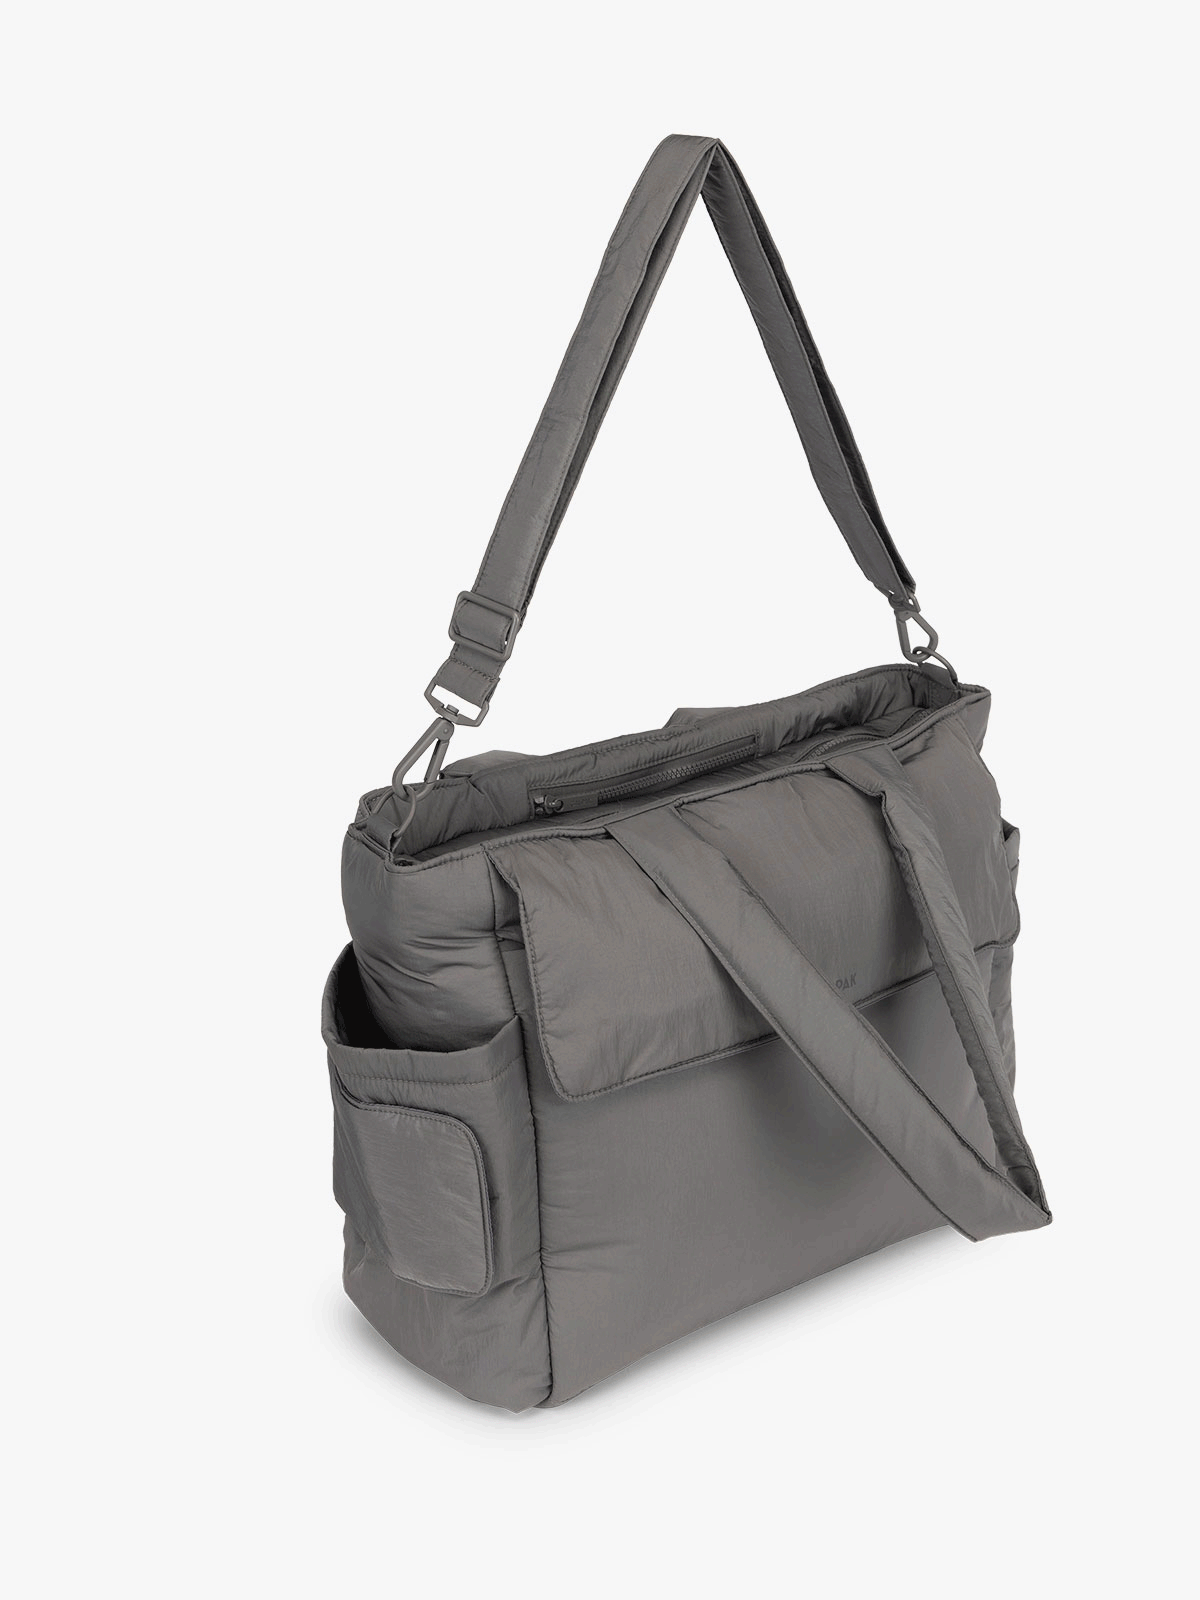 CALPAK diaper tote bag with baby wipe compartment in gray